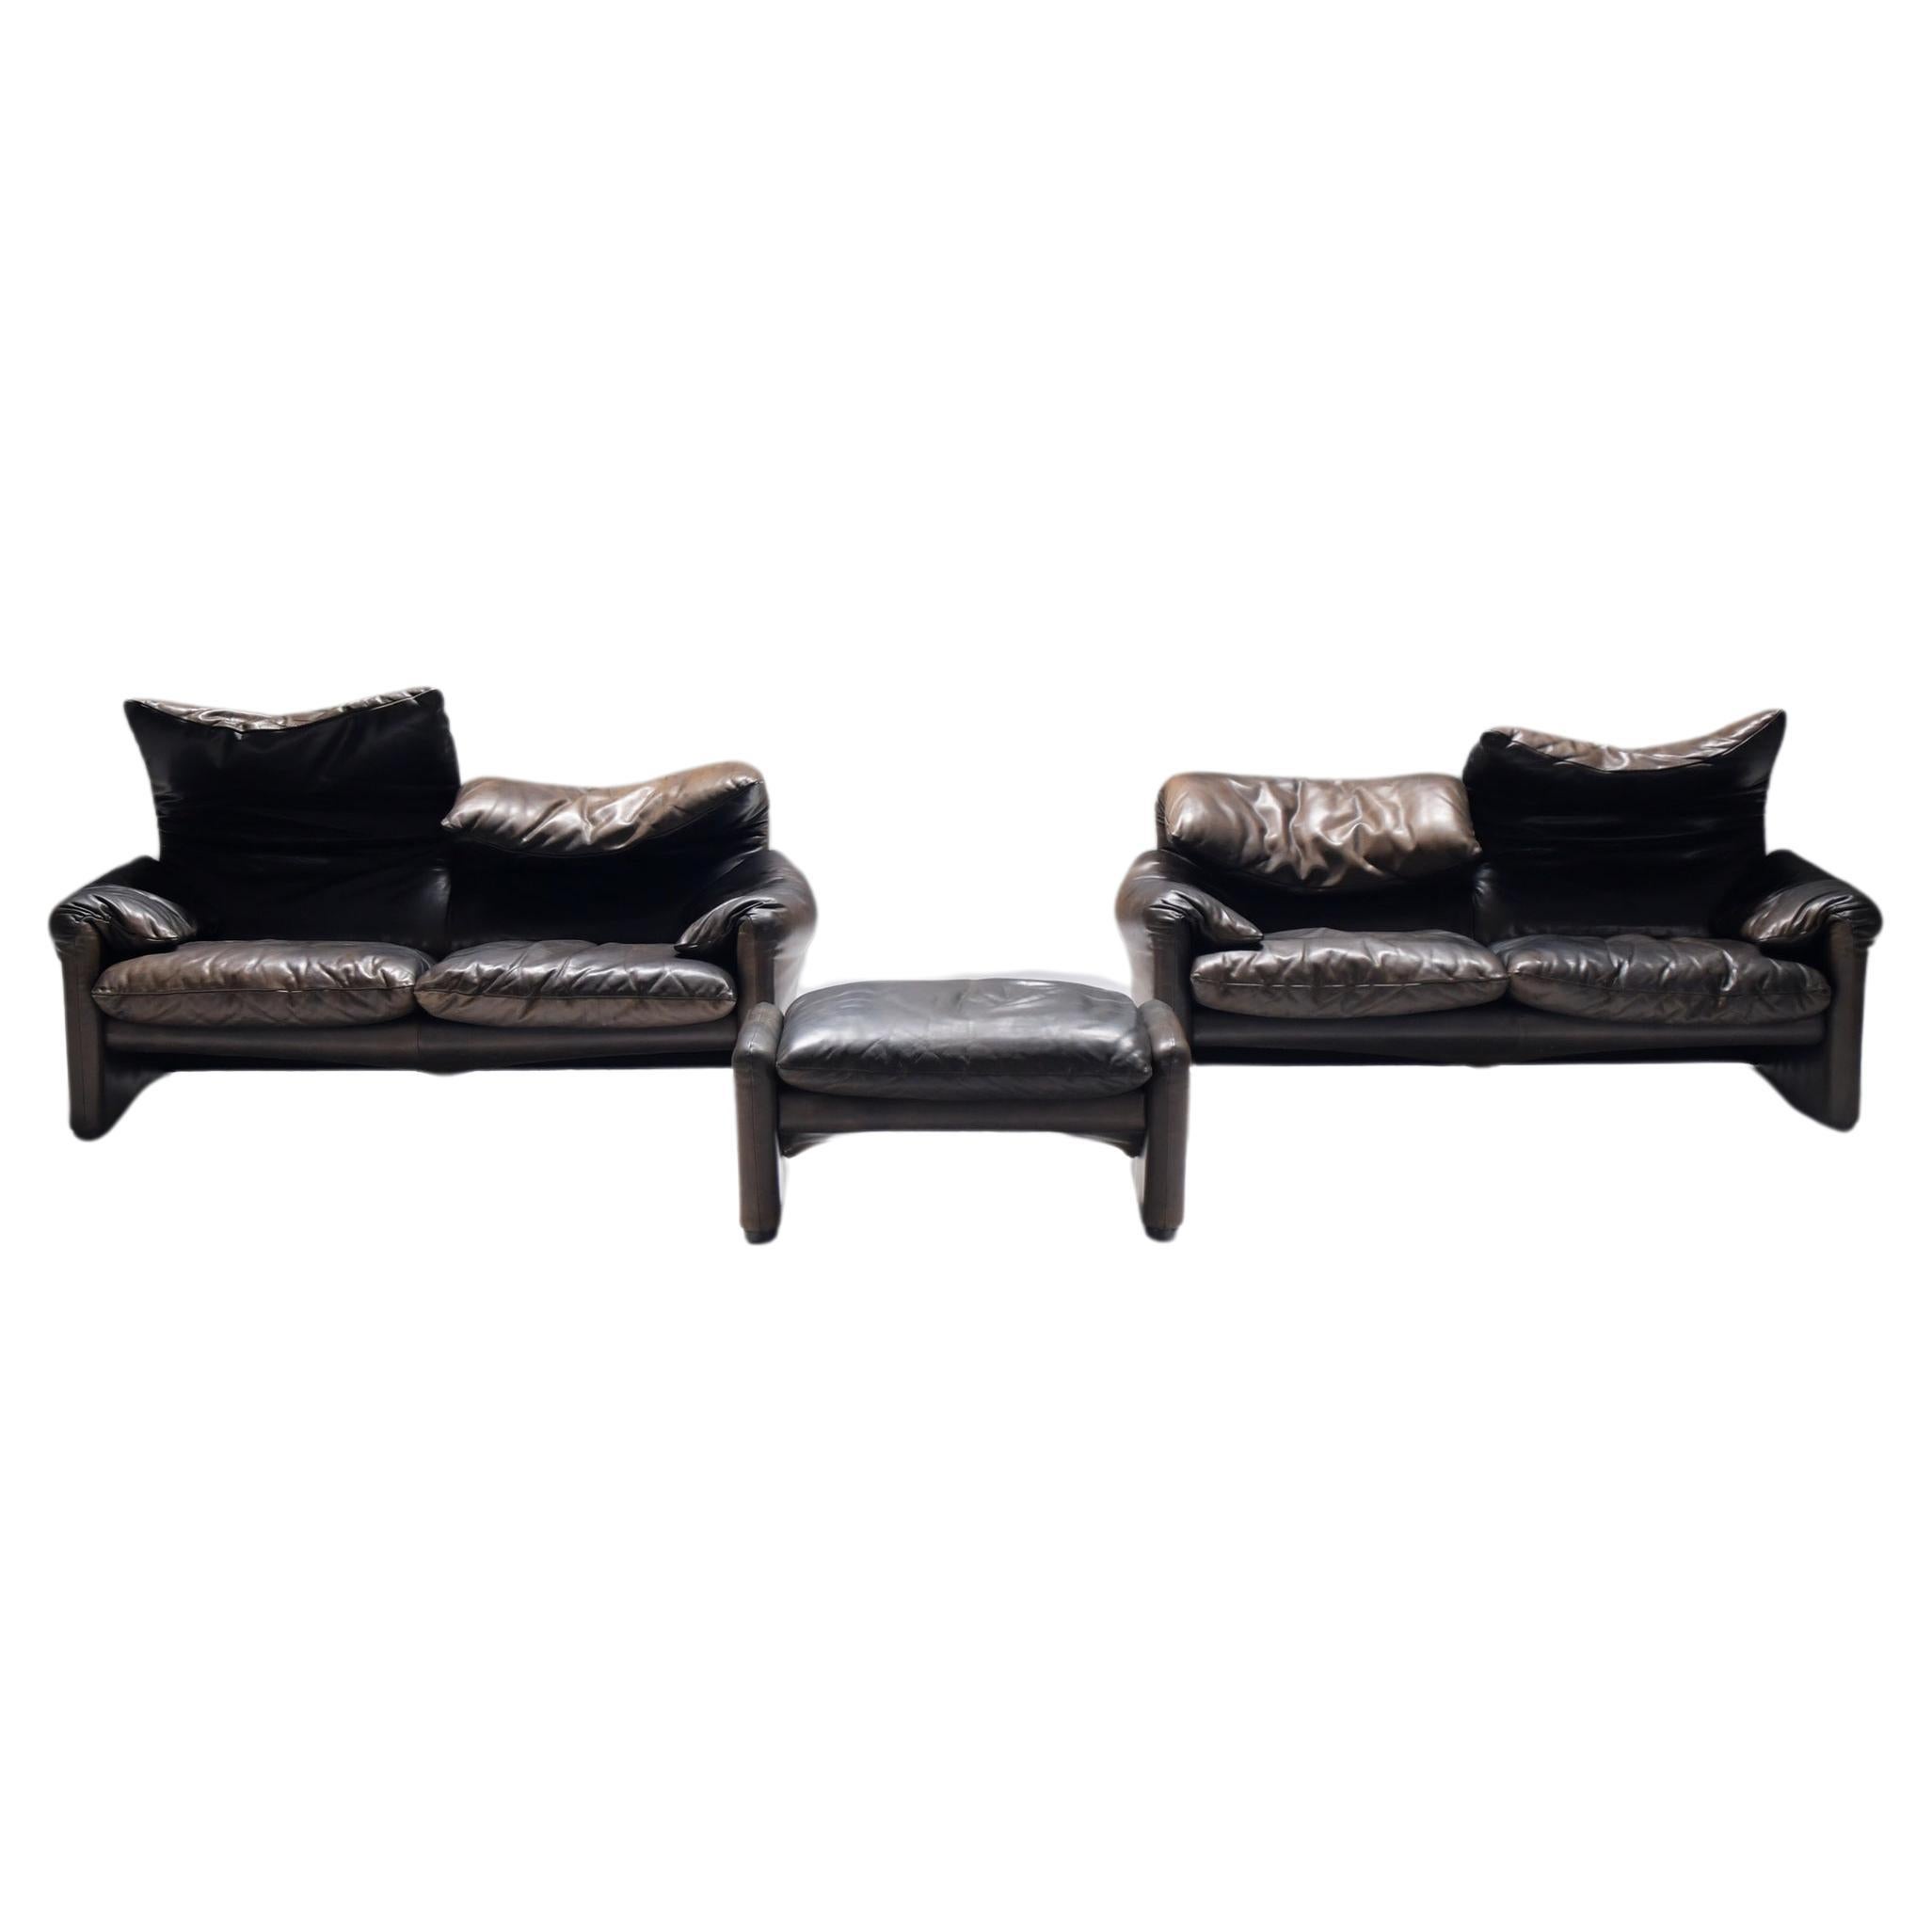 Rich patinated Maralunga set by Vico Magistretti for Cassina Italy